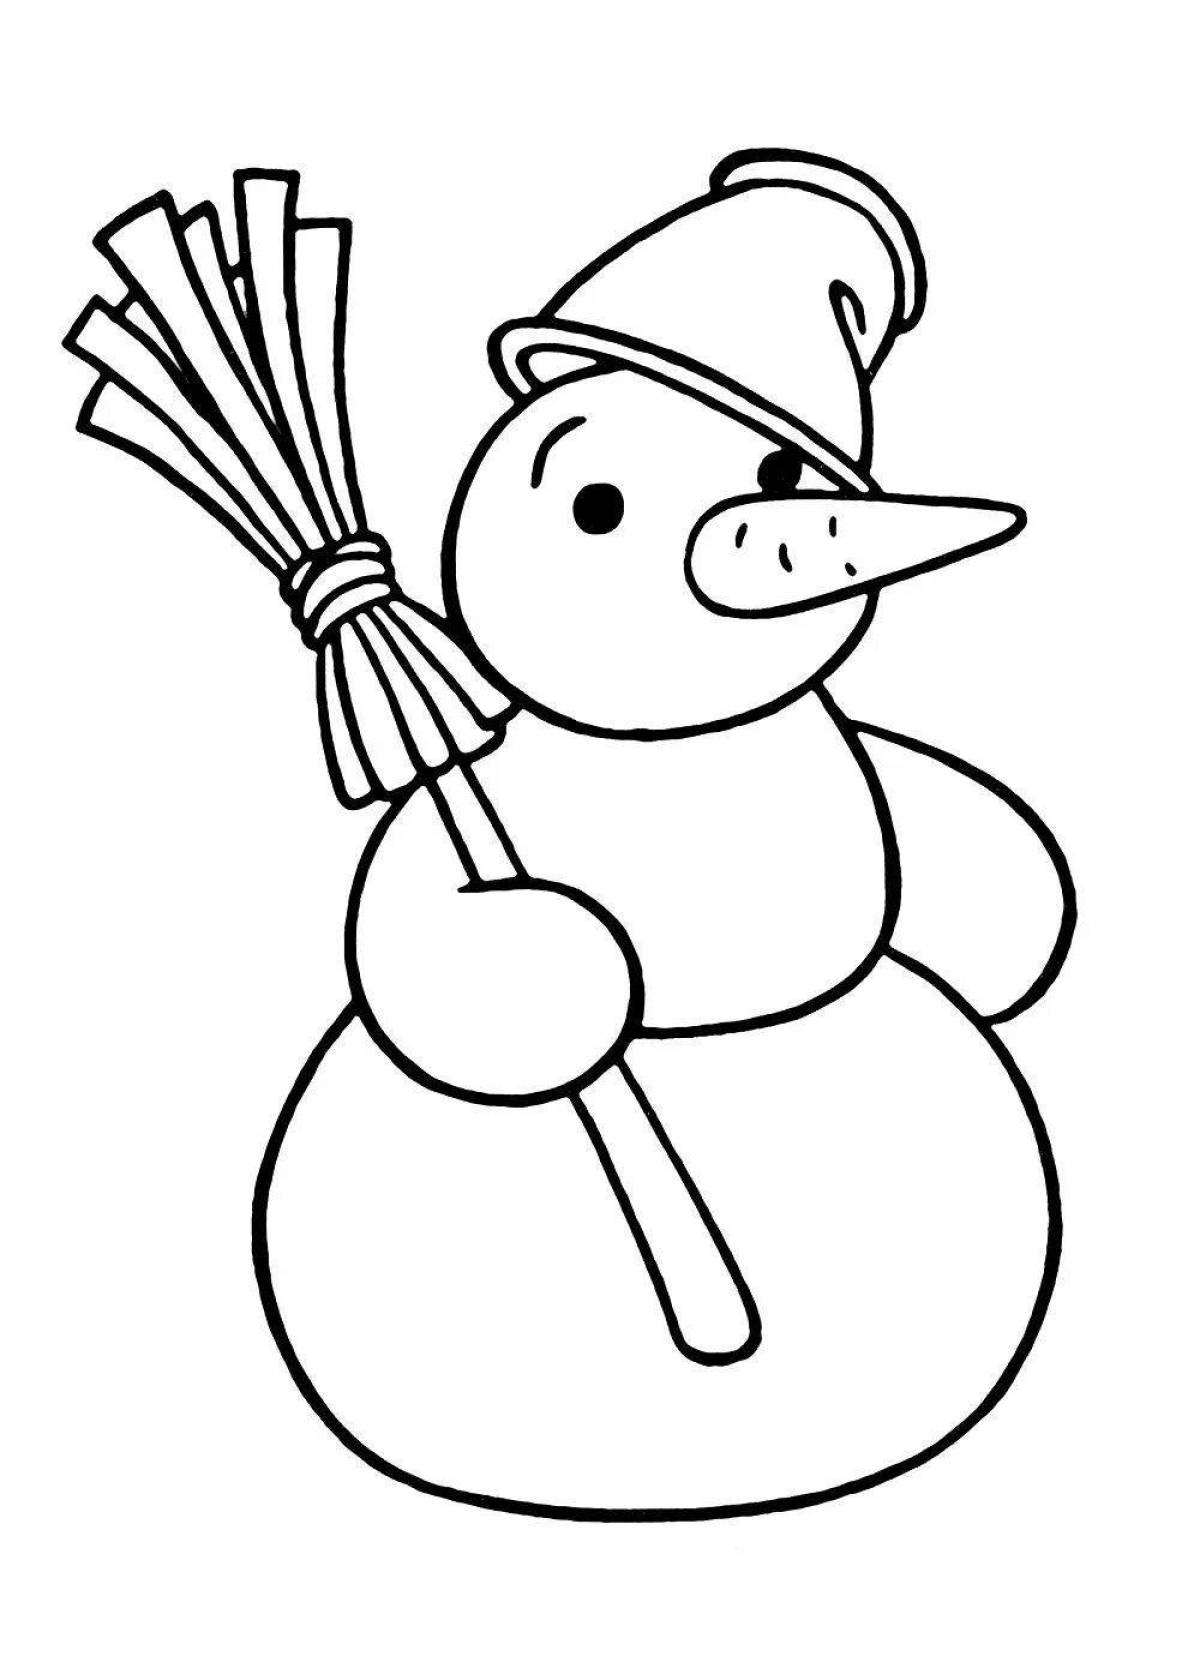 Humorous coloring book snowman with a broom